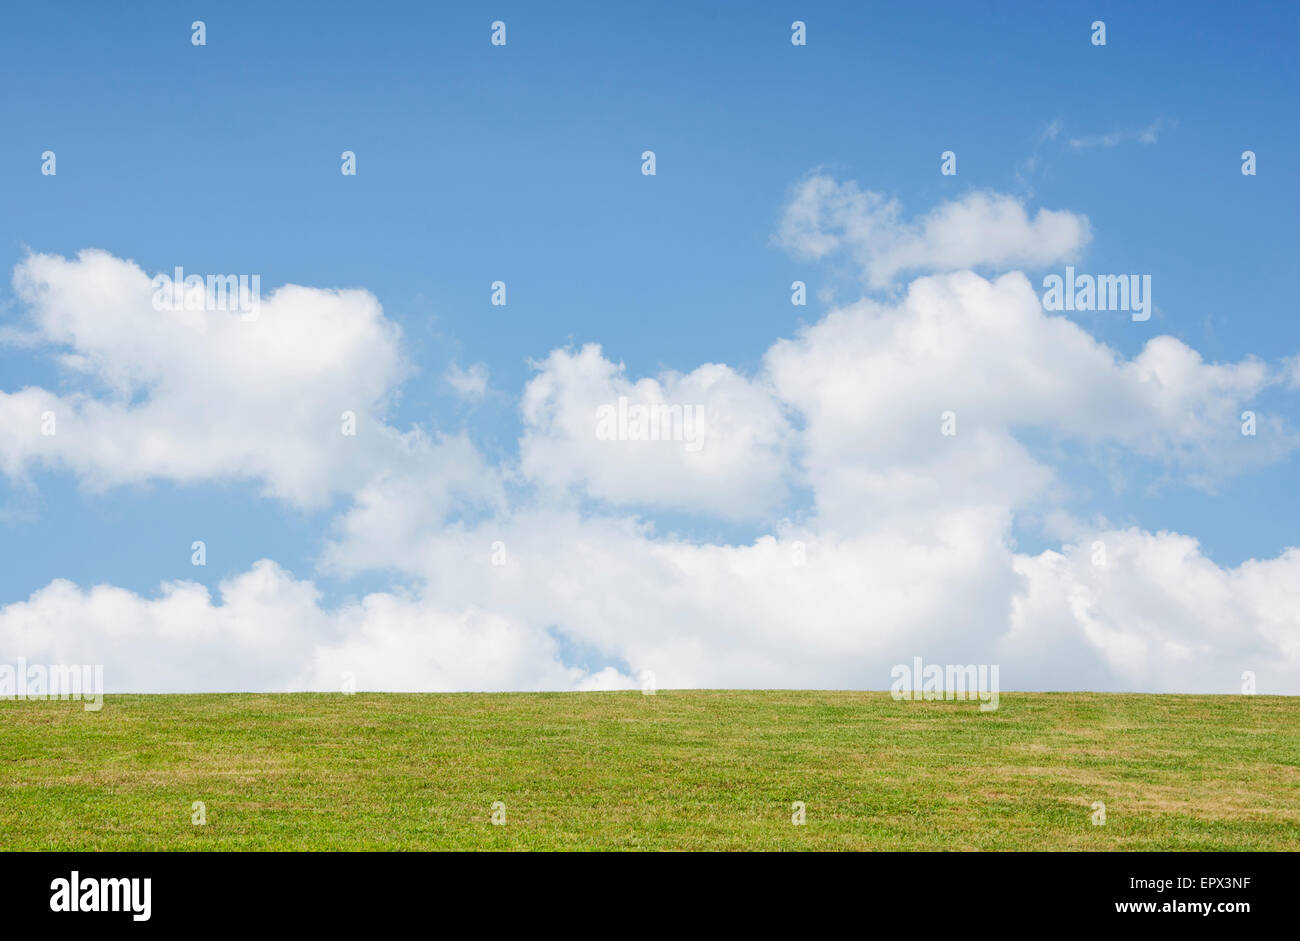 USA, New Jersey, Scenic view of landscape Stock Photo